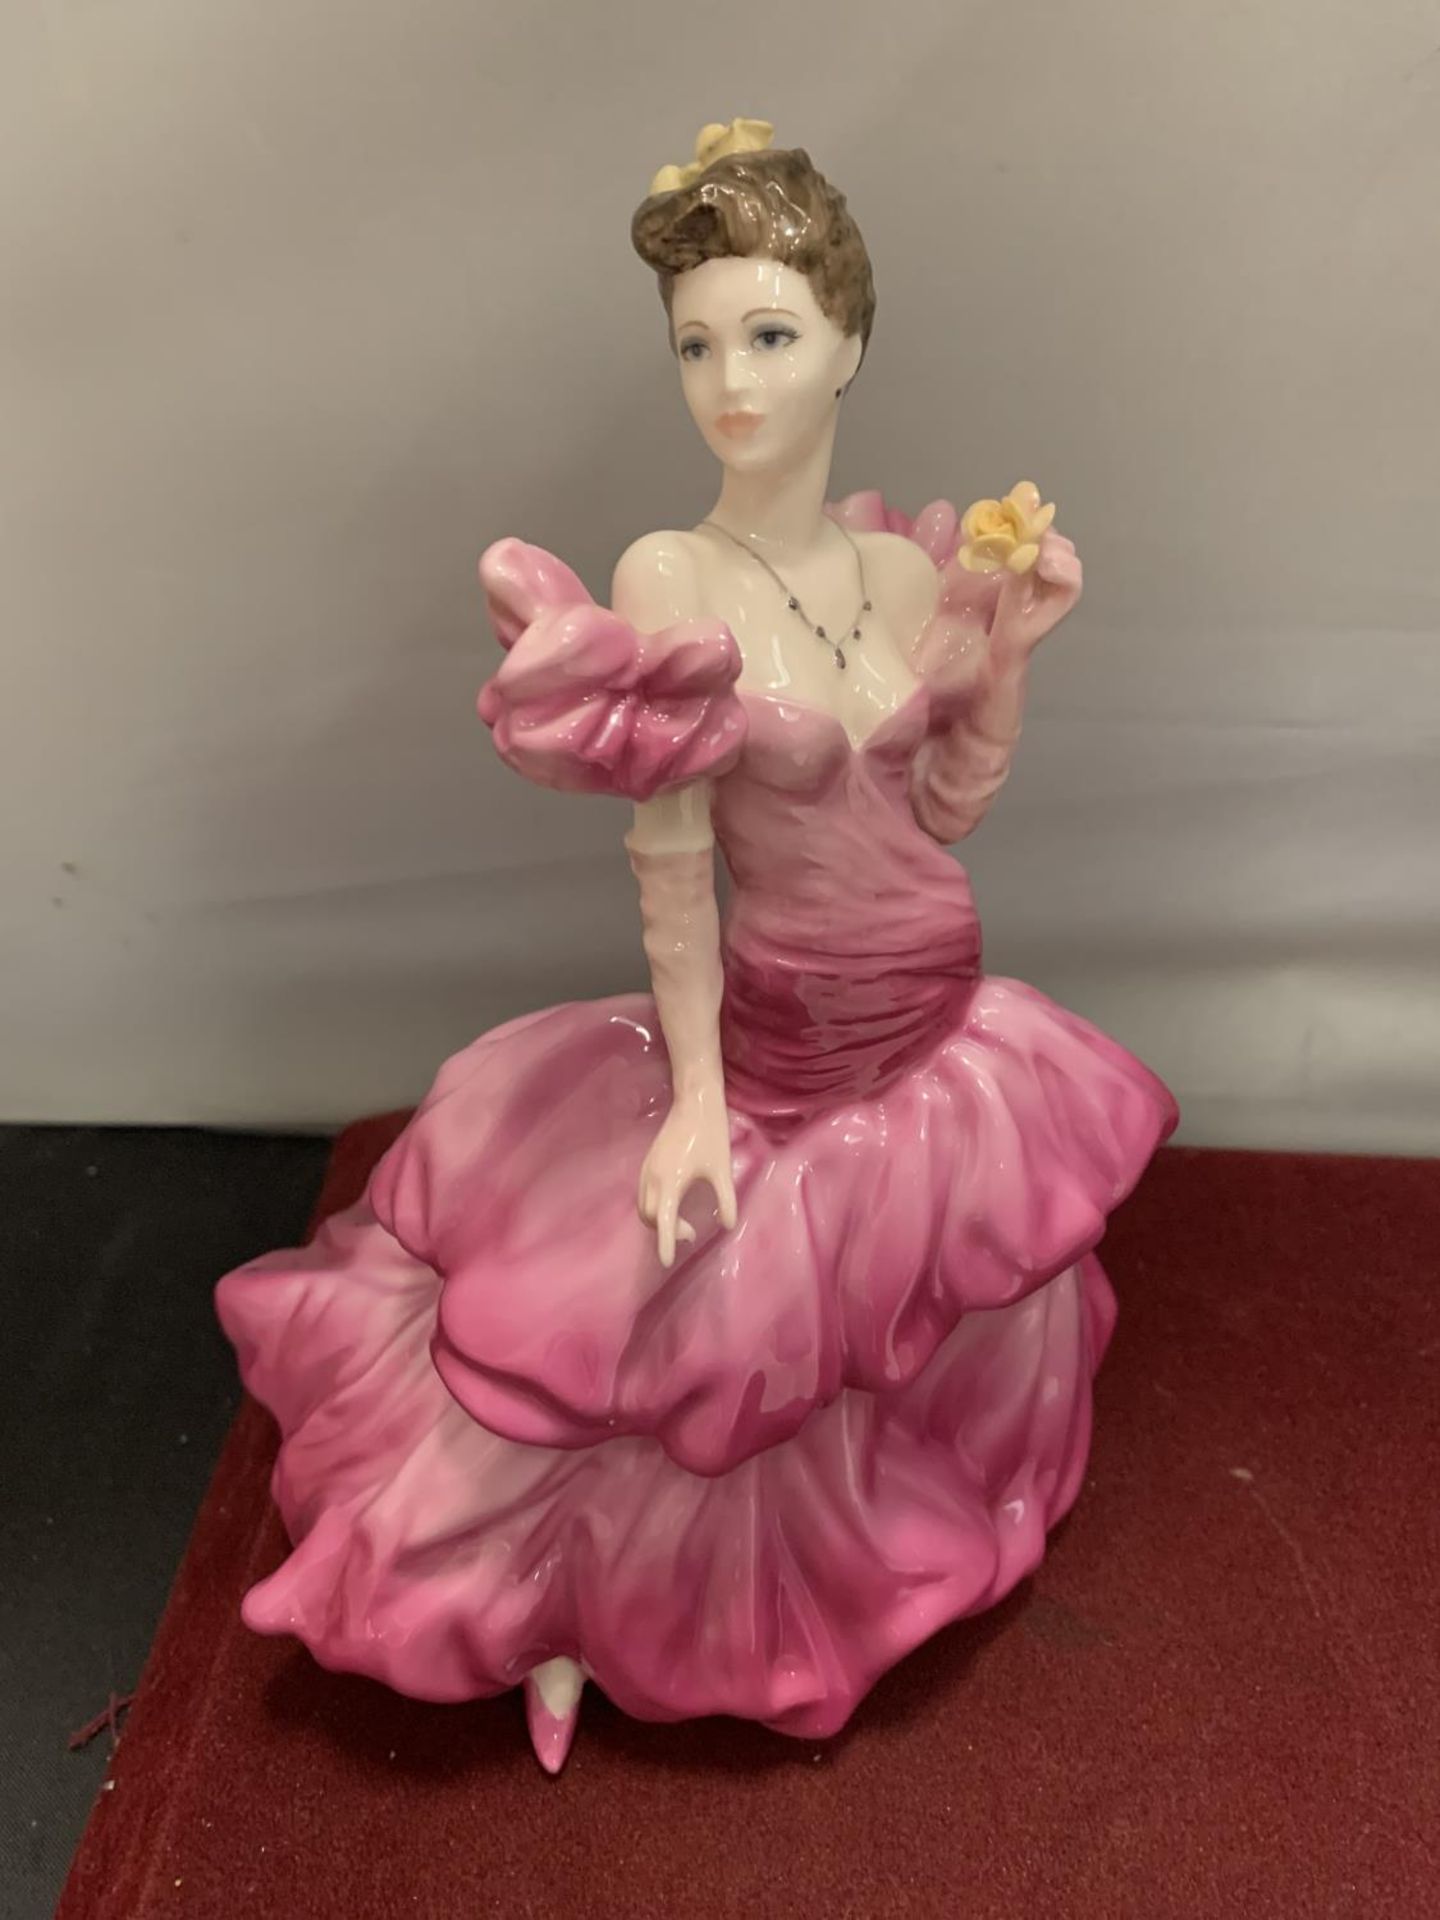 TWO COALPORT FIGURINES TO INCLUDE LADIES OF FASHION FIGURINES EMMA JANE AND CHANITILLY LACE DIGNITY - Image 2 of 4